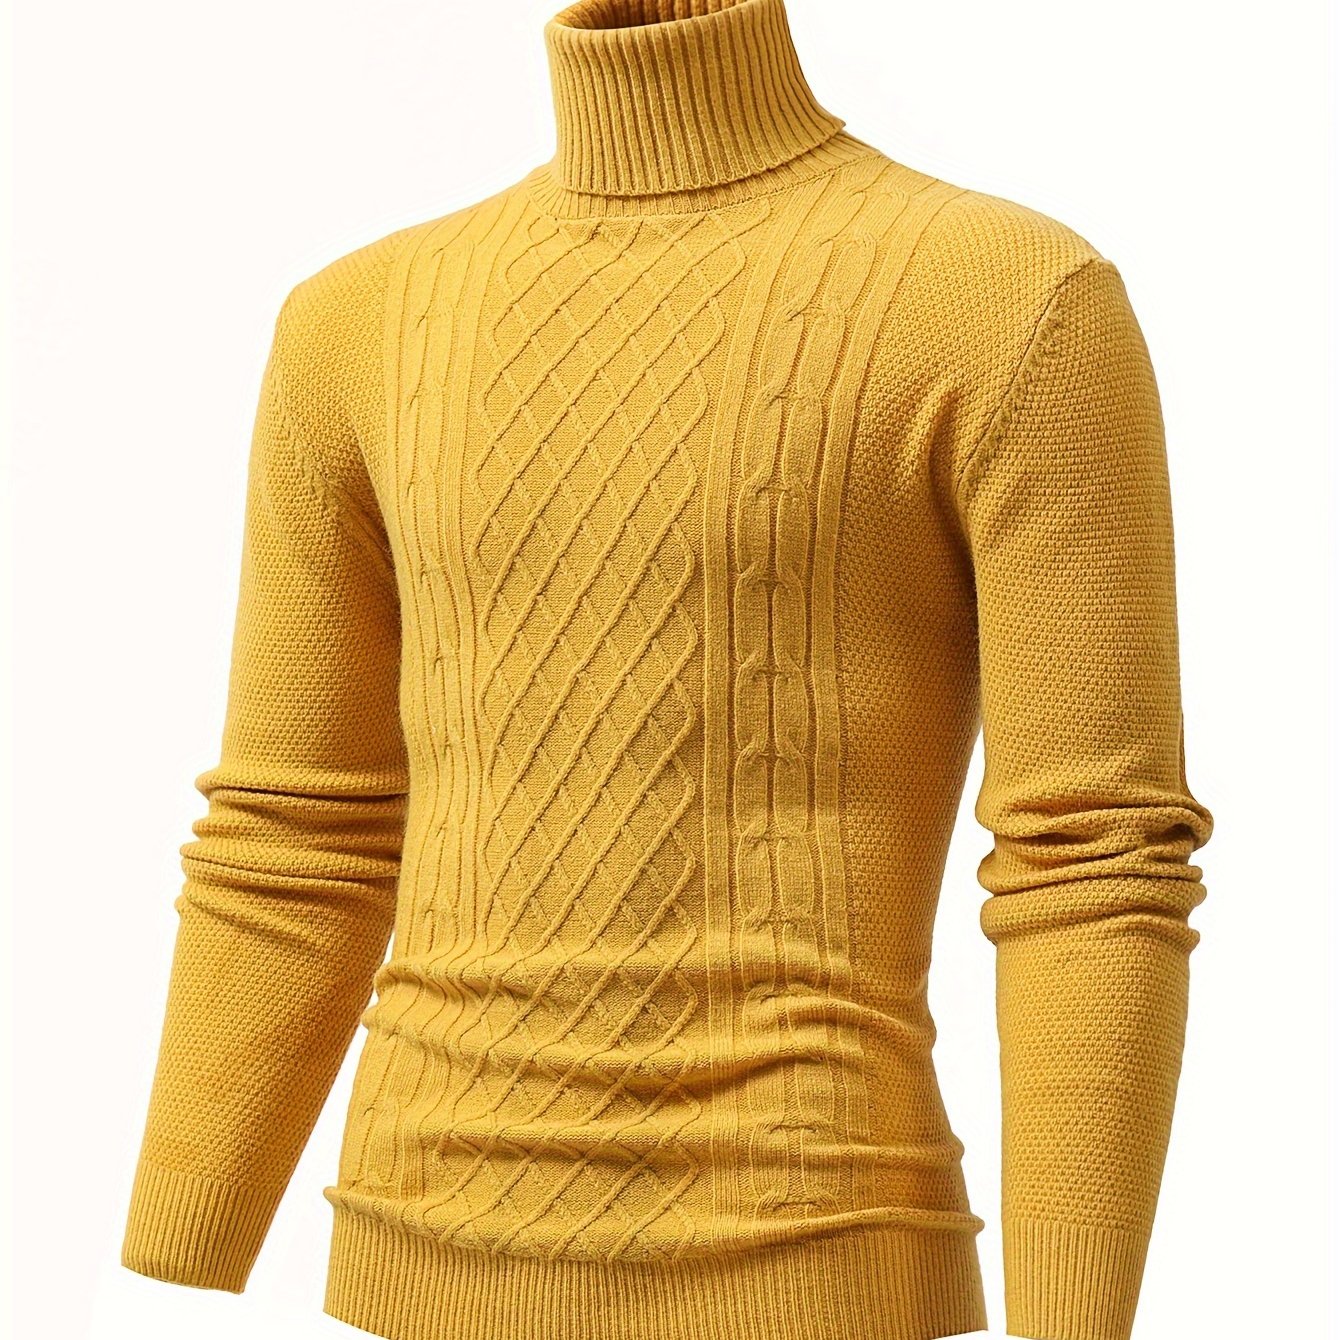 Foruwish - Turtle Neck Knitted Cable Sweater, Men's Casual Warm Solid High Stretch Pullover Sweater For Fall Winter